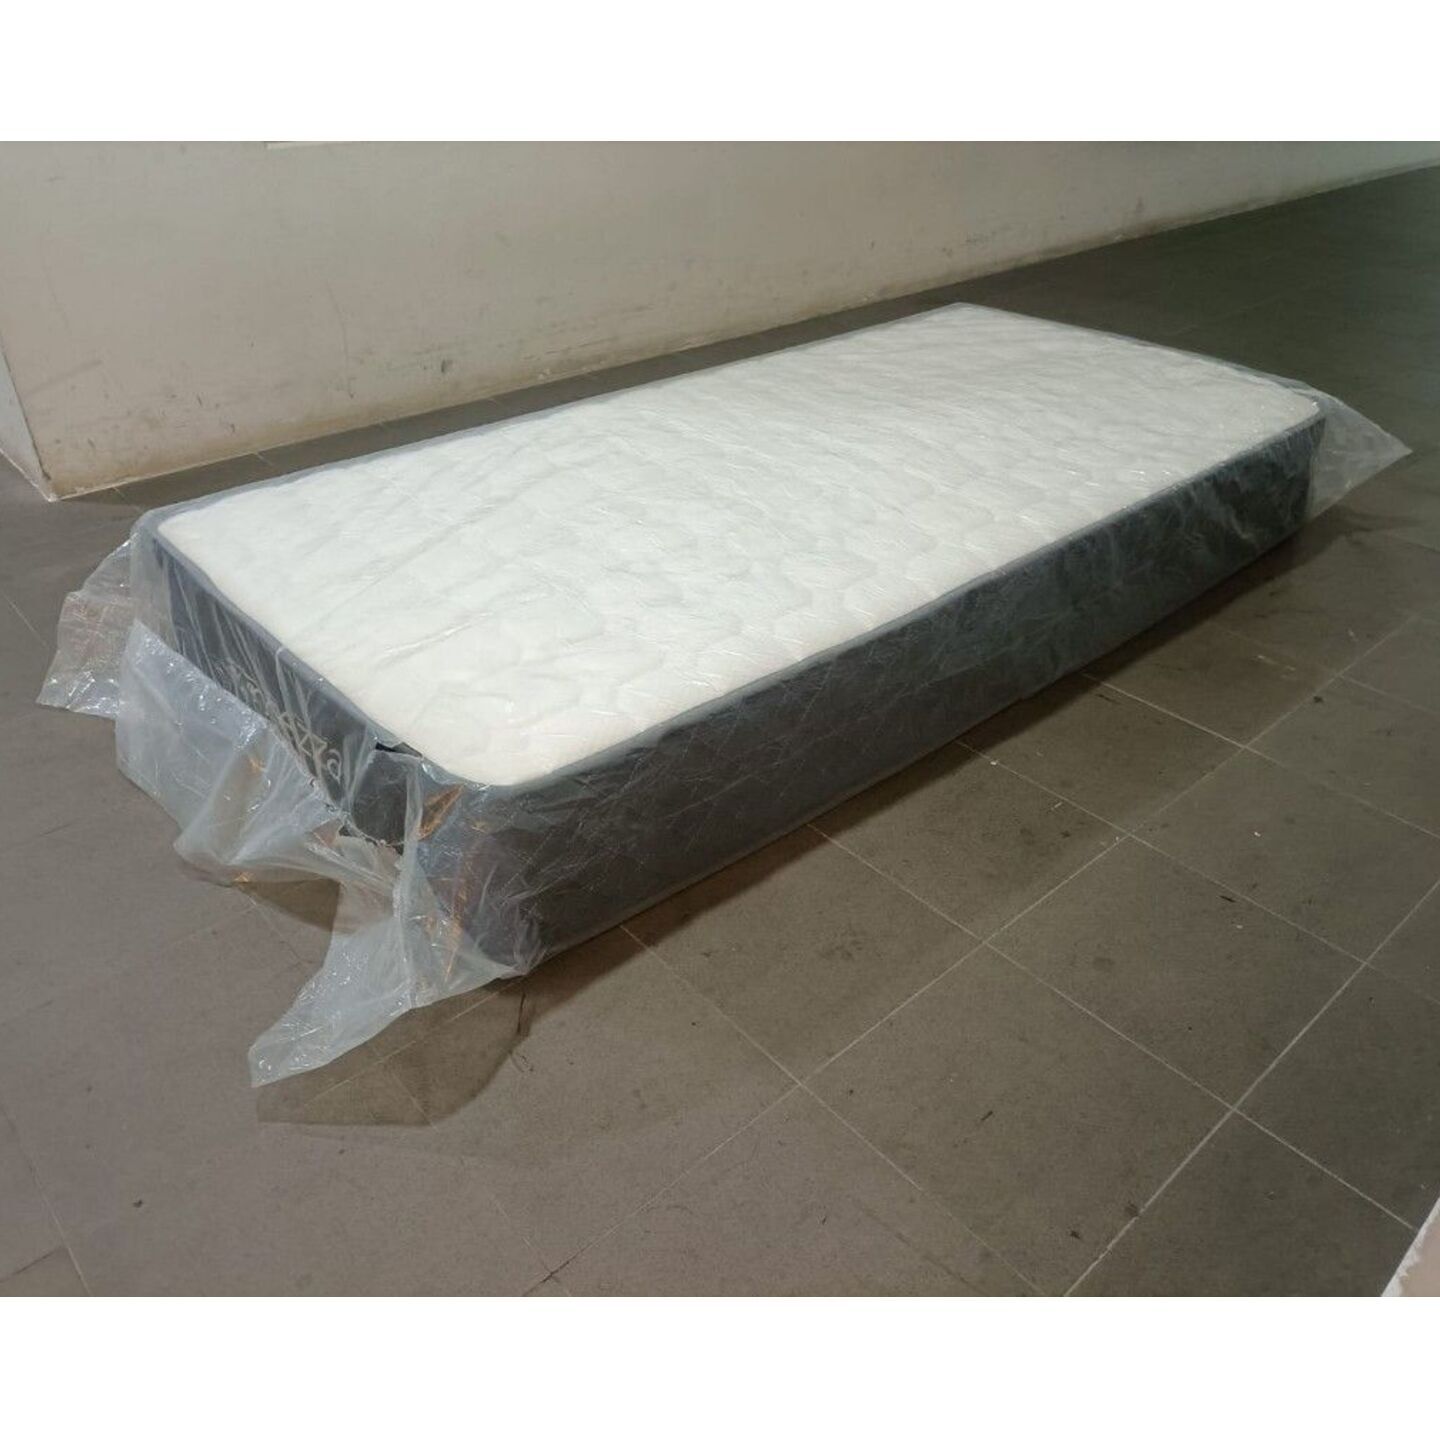 SUPREZZA II Single Size Pocketed Spring Mattress with Pillow Top by SEPORA